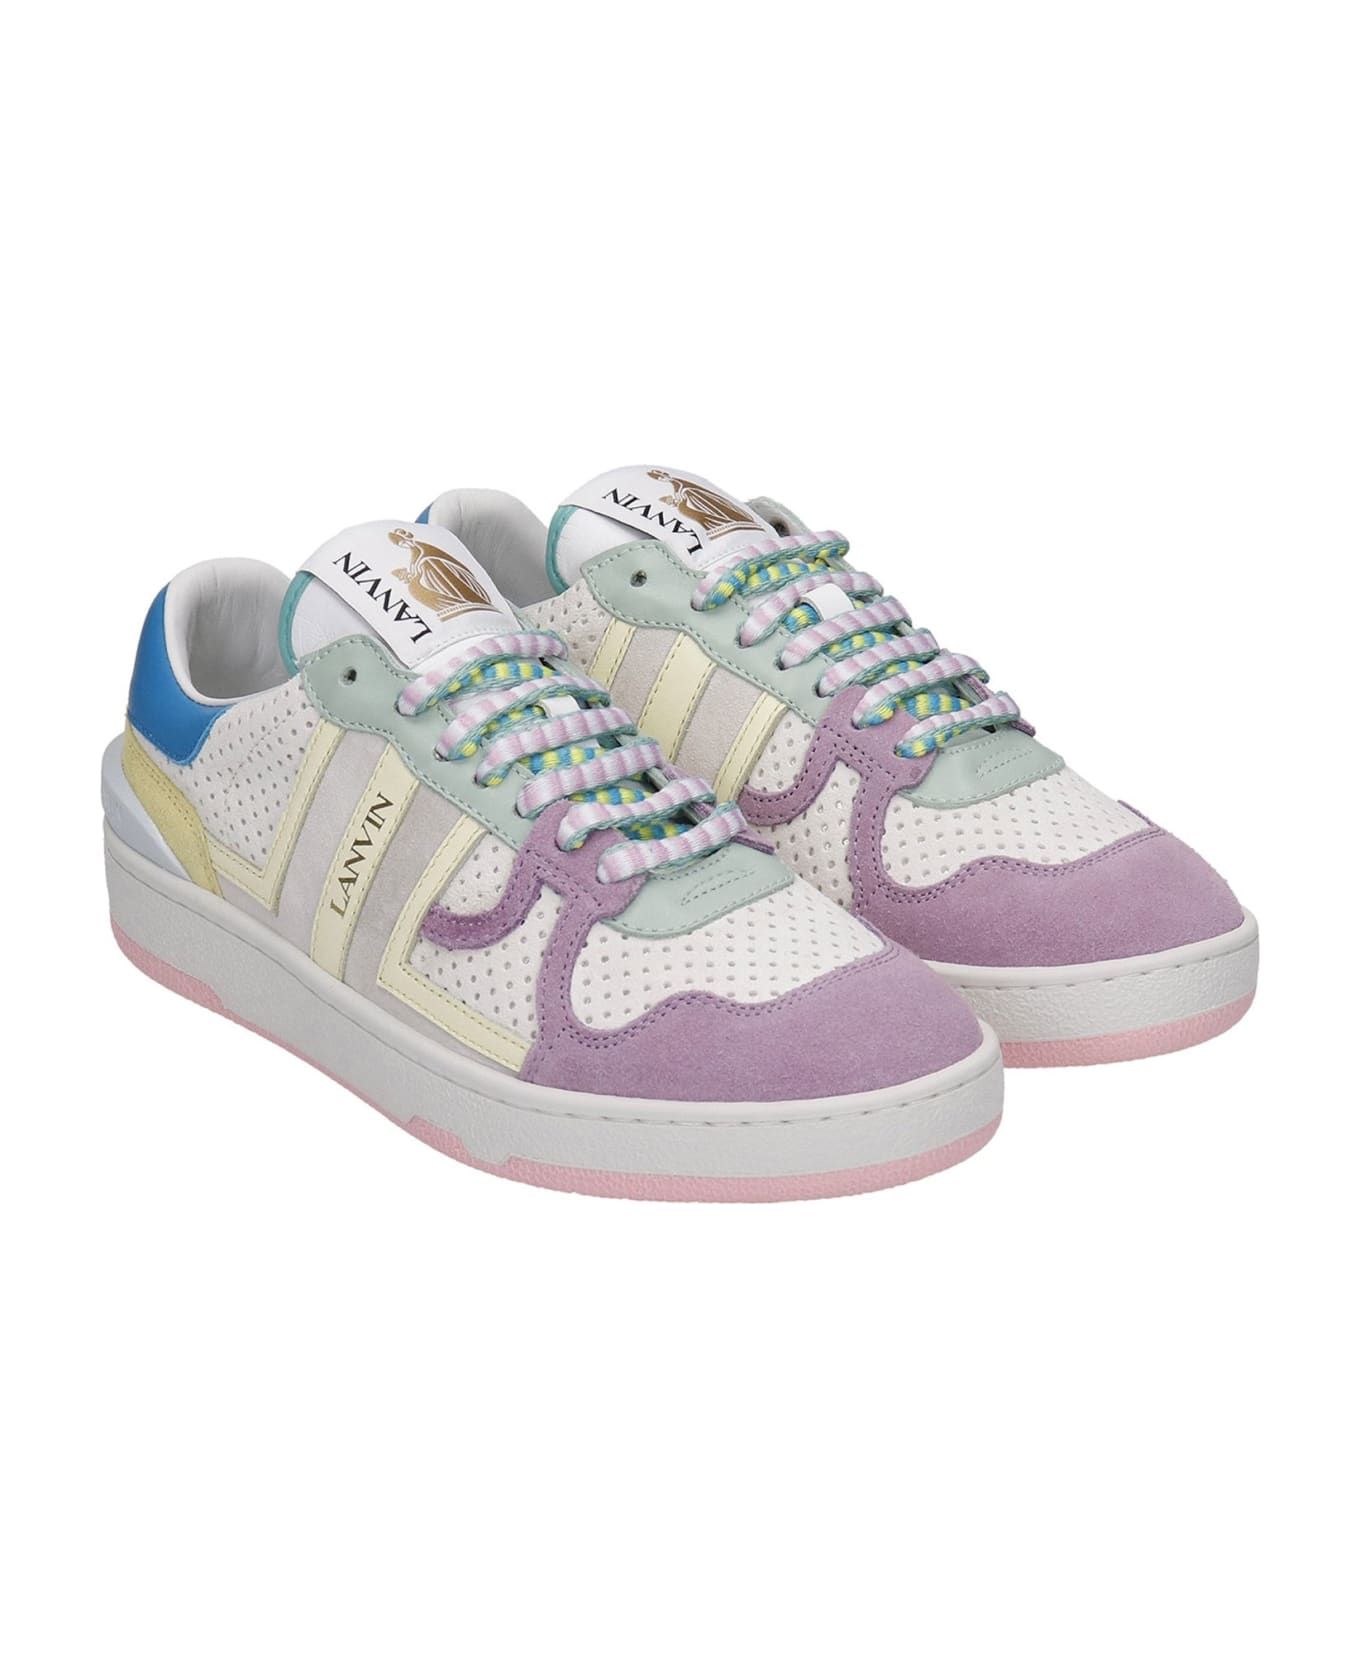 Lanvin Clay Leather Sneakers - Purple